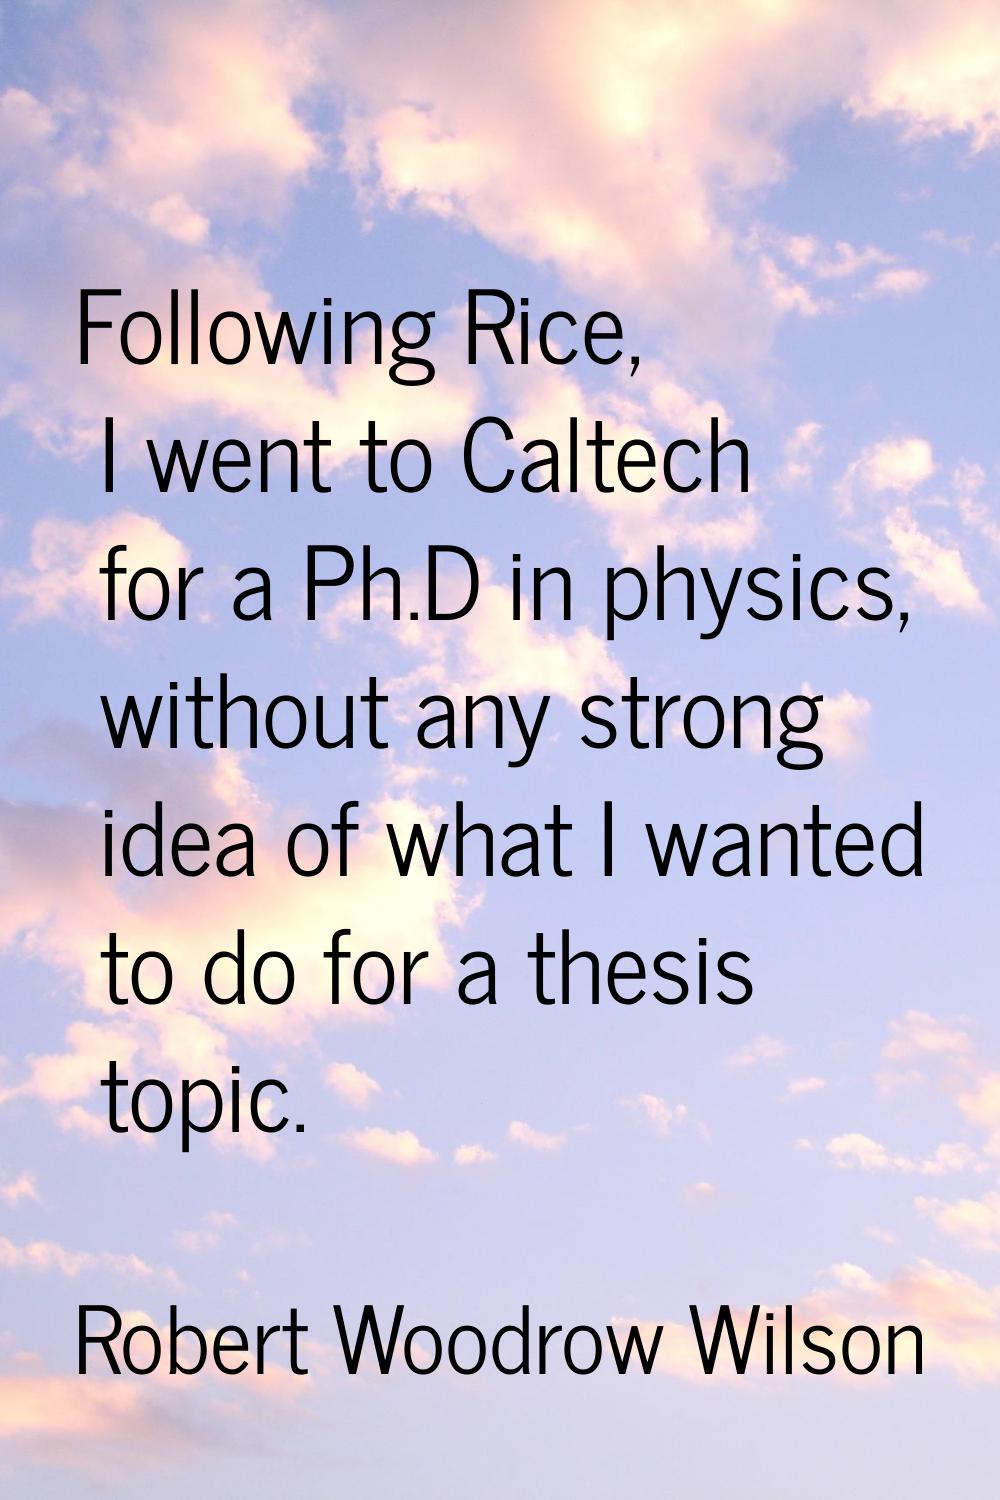 Following Rice, I went to Caltech for a Ph.D in physics, without any strong idea of what I wanted t